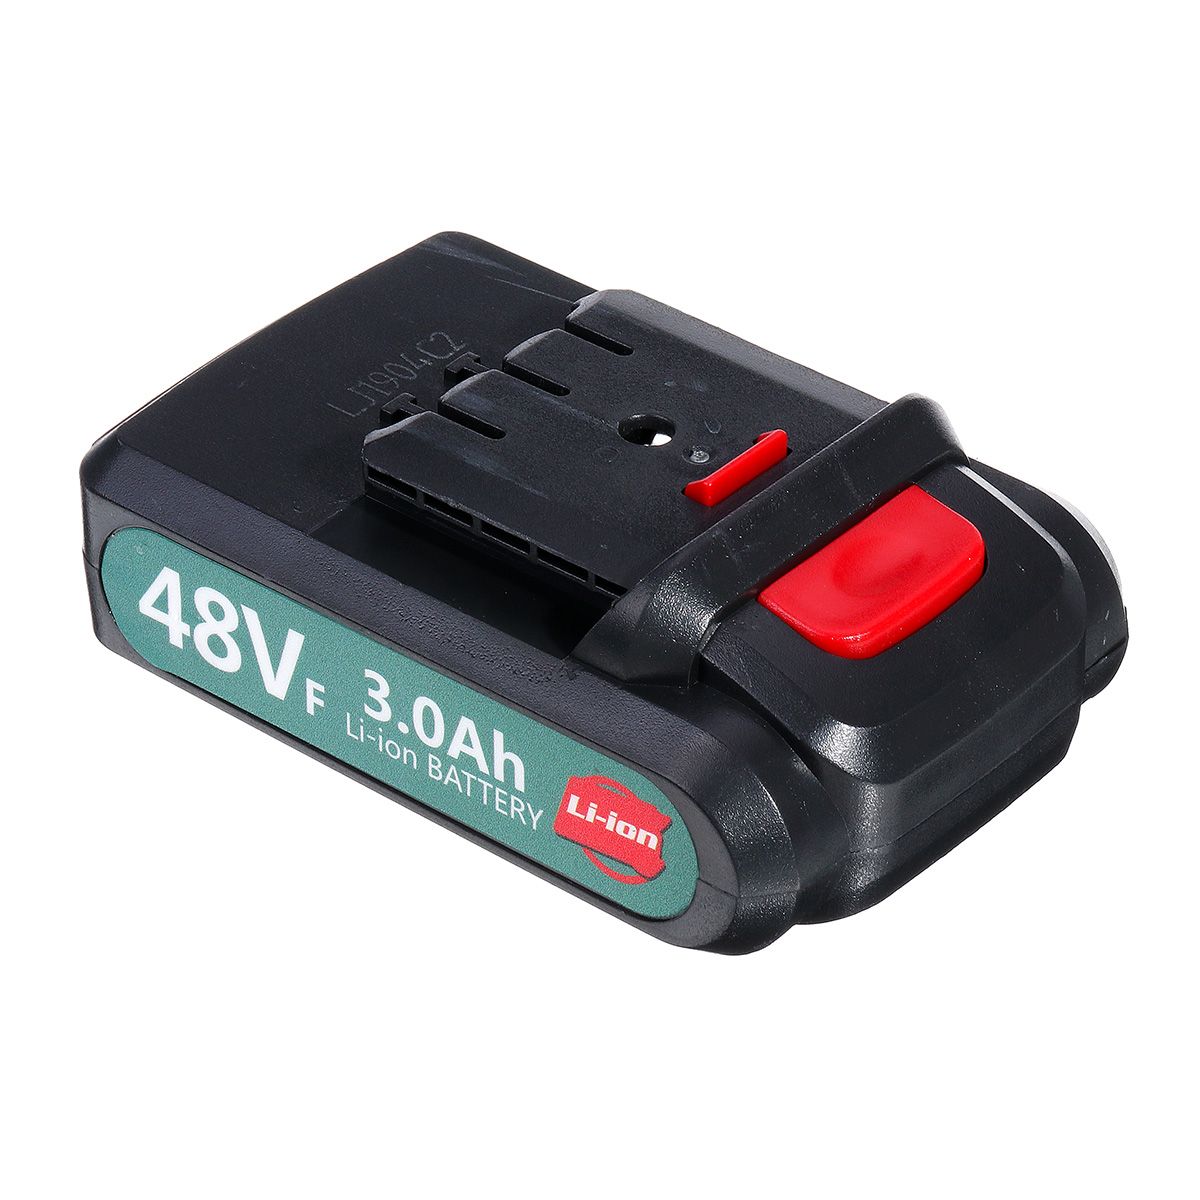 48VF-3000mAh-Electric-Drill-Rechargeable-Power-Screwdriver-251-Torque-W-1-or-2-Li-ion-Battery-1515425